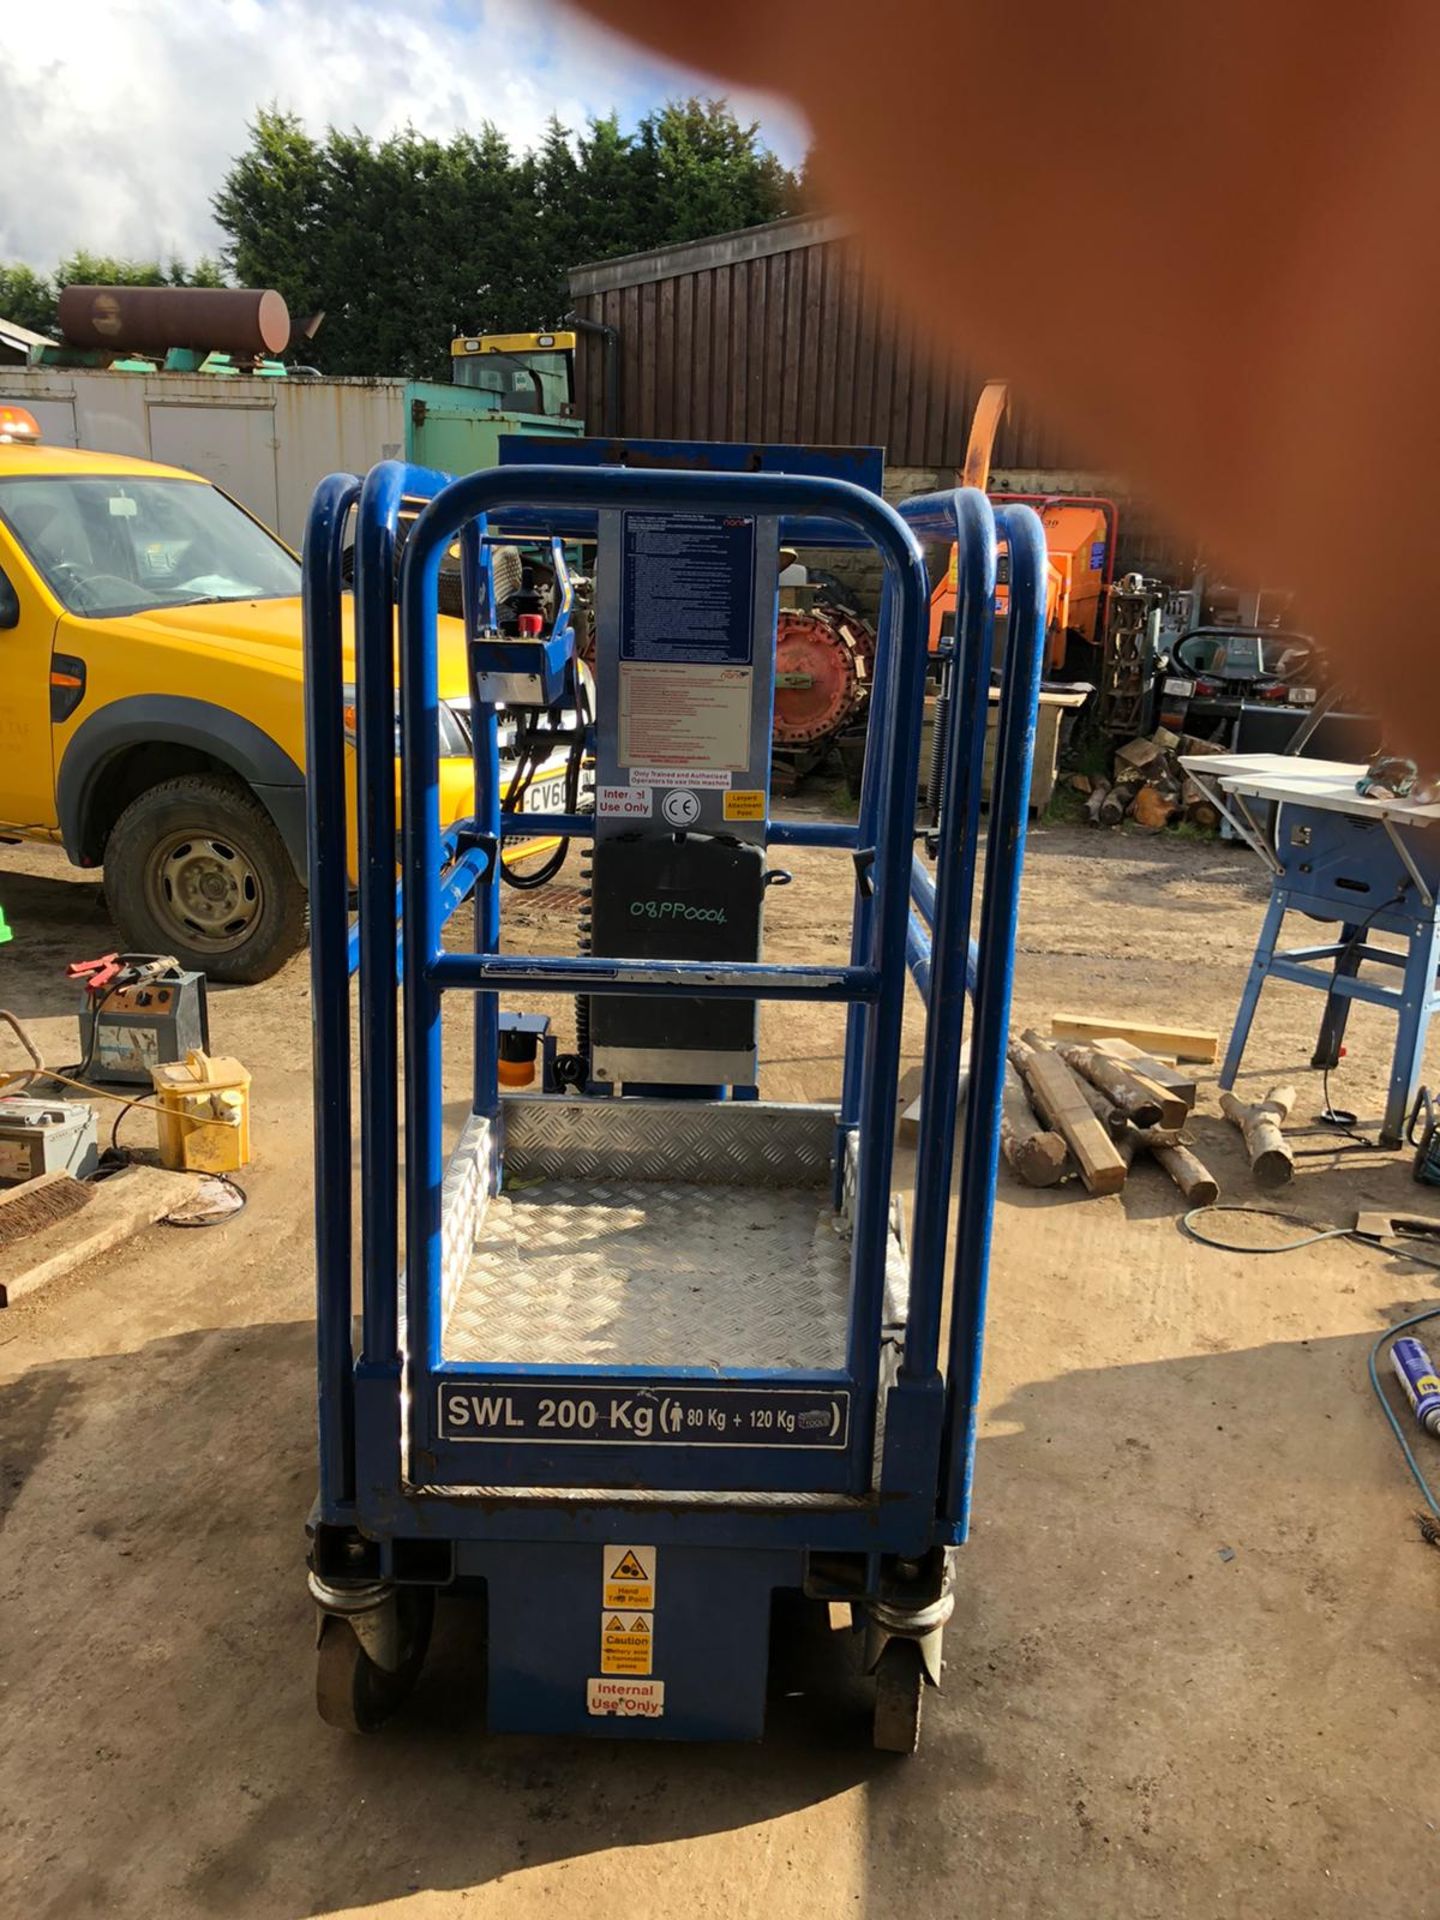 POWER TOWER SELF PROPELLED ELECTRIC LIFT, VERY EASY TO USE *PLUS VAT* - Image 3 of 8